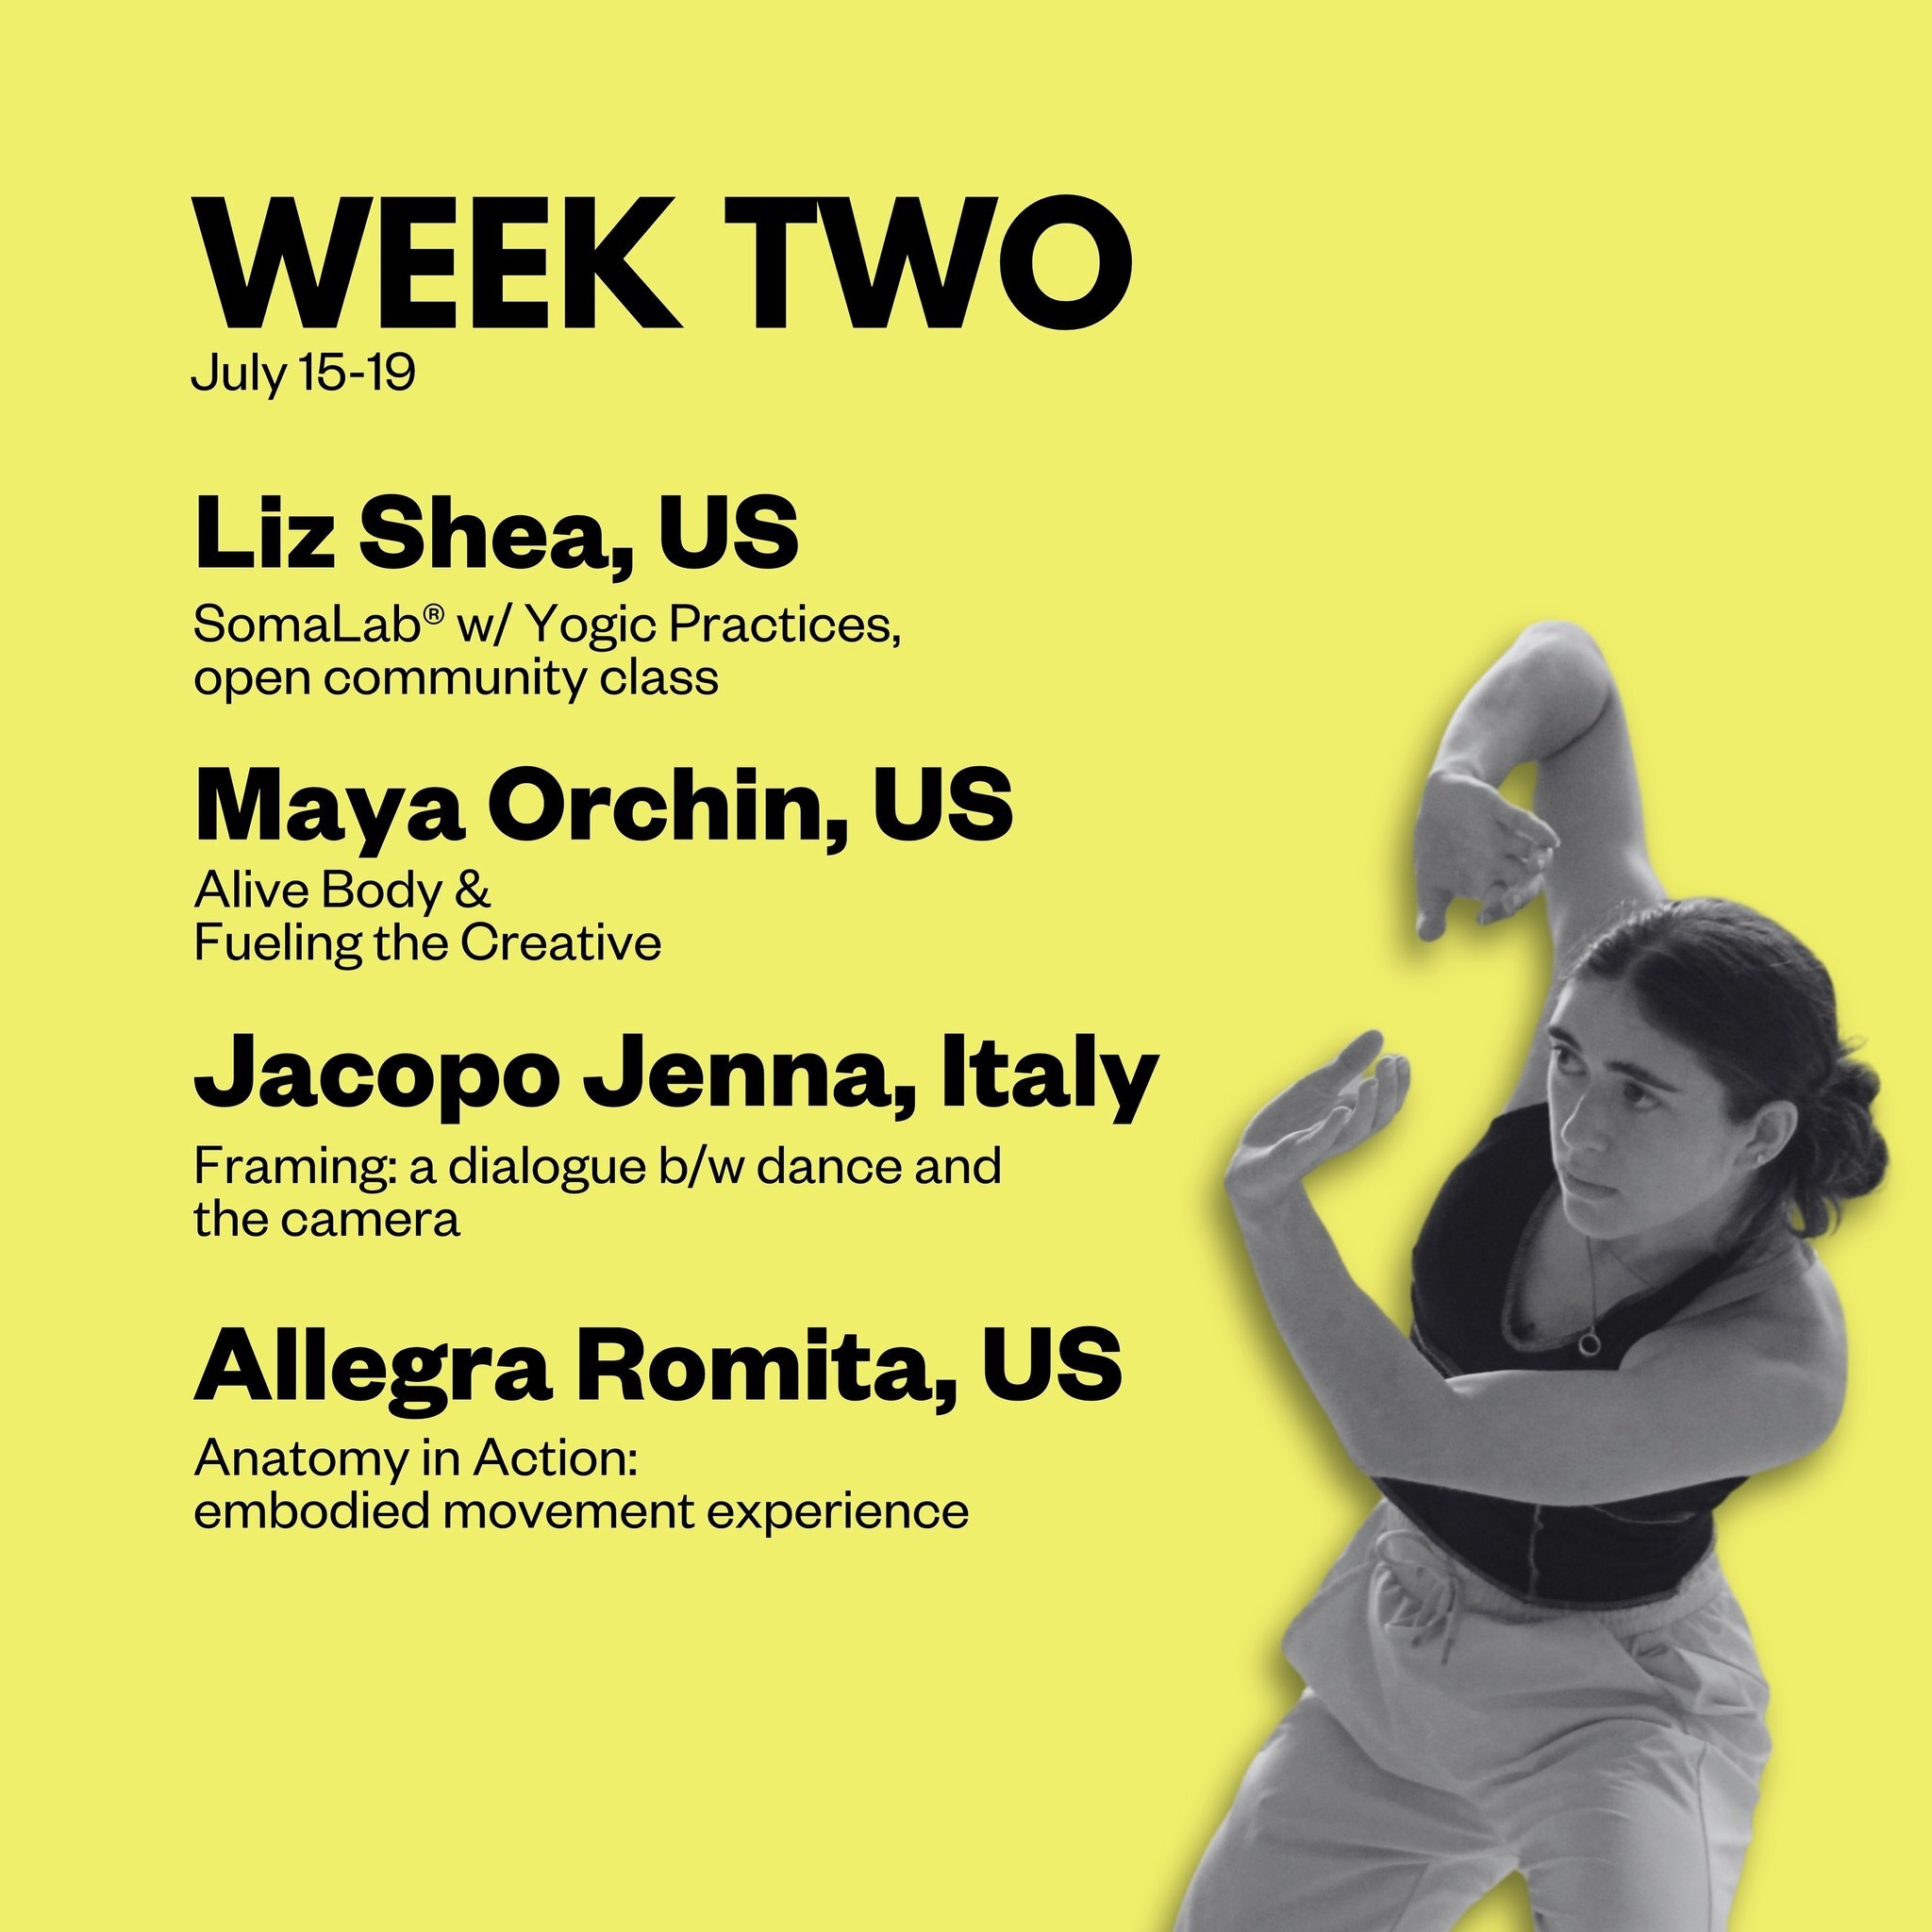 💫 Advanced Training Program Week Two (July 15-19) faculty and workshops.

Liz Shea, US
SomaLab&reg; w/ Yogic Practices, open community class

Maya Orchin, US
Alive Body &amp; Fueling the Creative

Jacopo Jenna, Italy
Framing: a dialogue b/w dance an